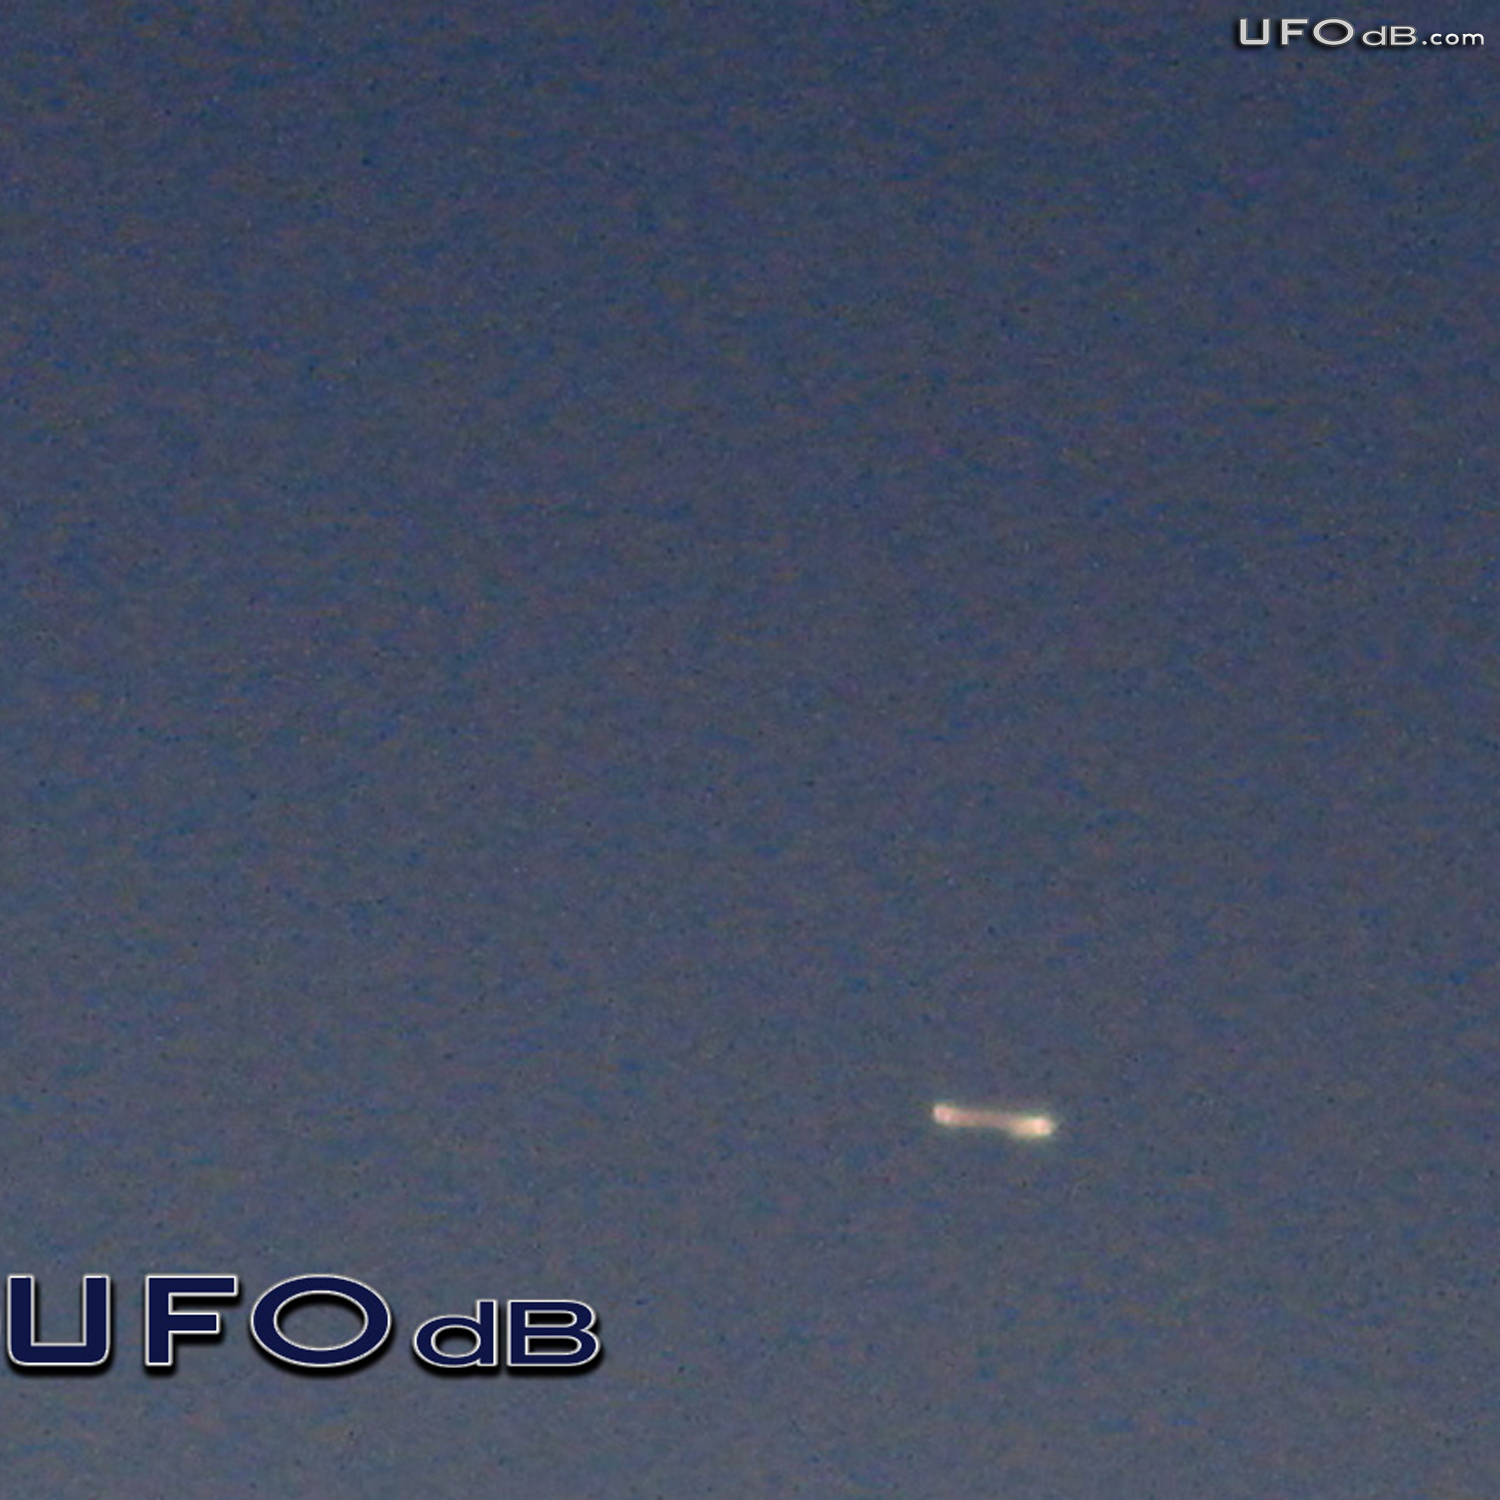 Changing Luminance UFO caught on picture | Katy, Texas | April 6 2011 UFO Picture #306-2